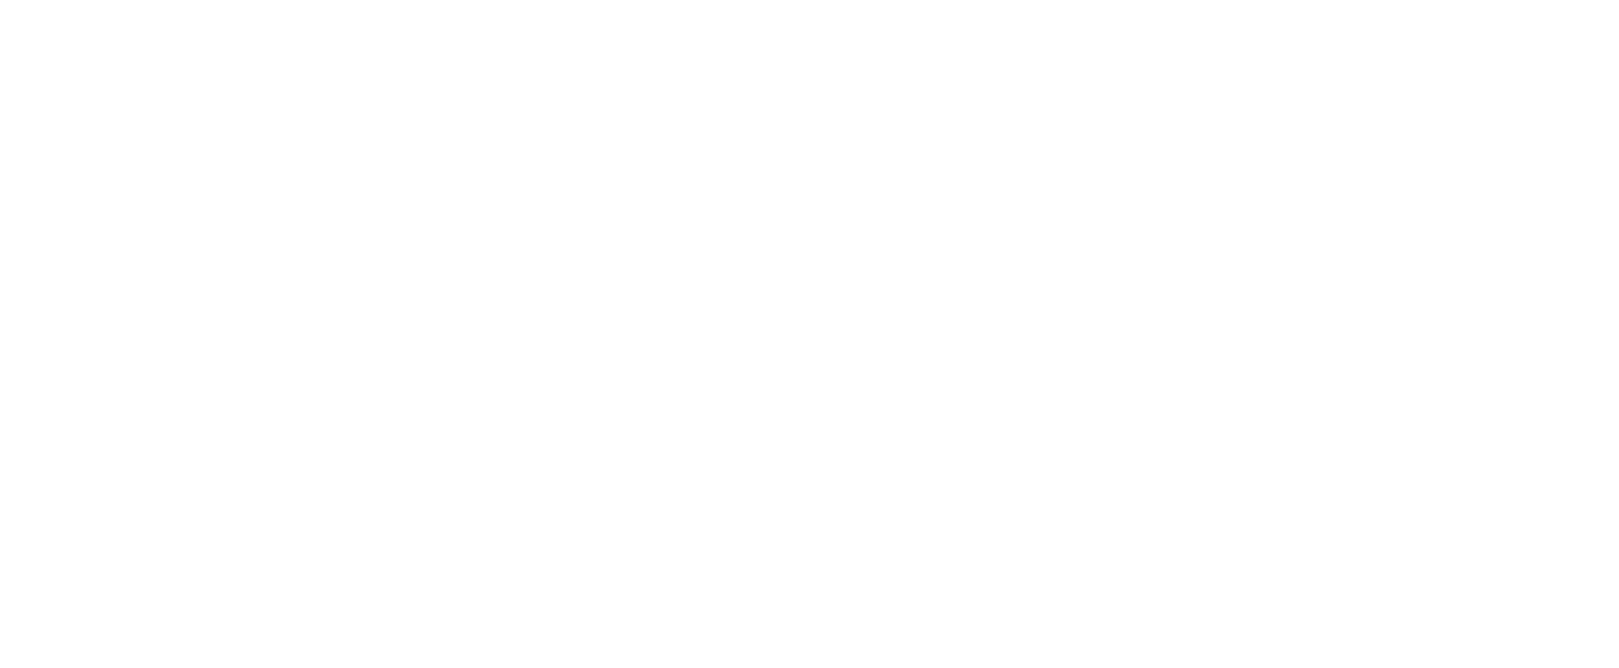 The Fitness Consultancy